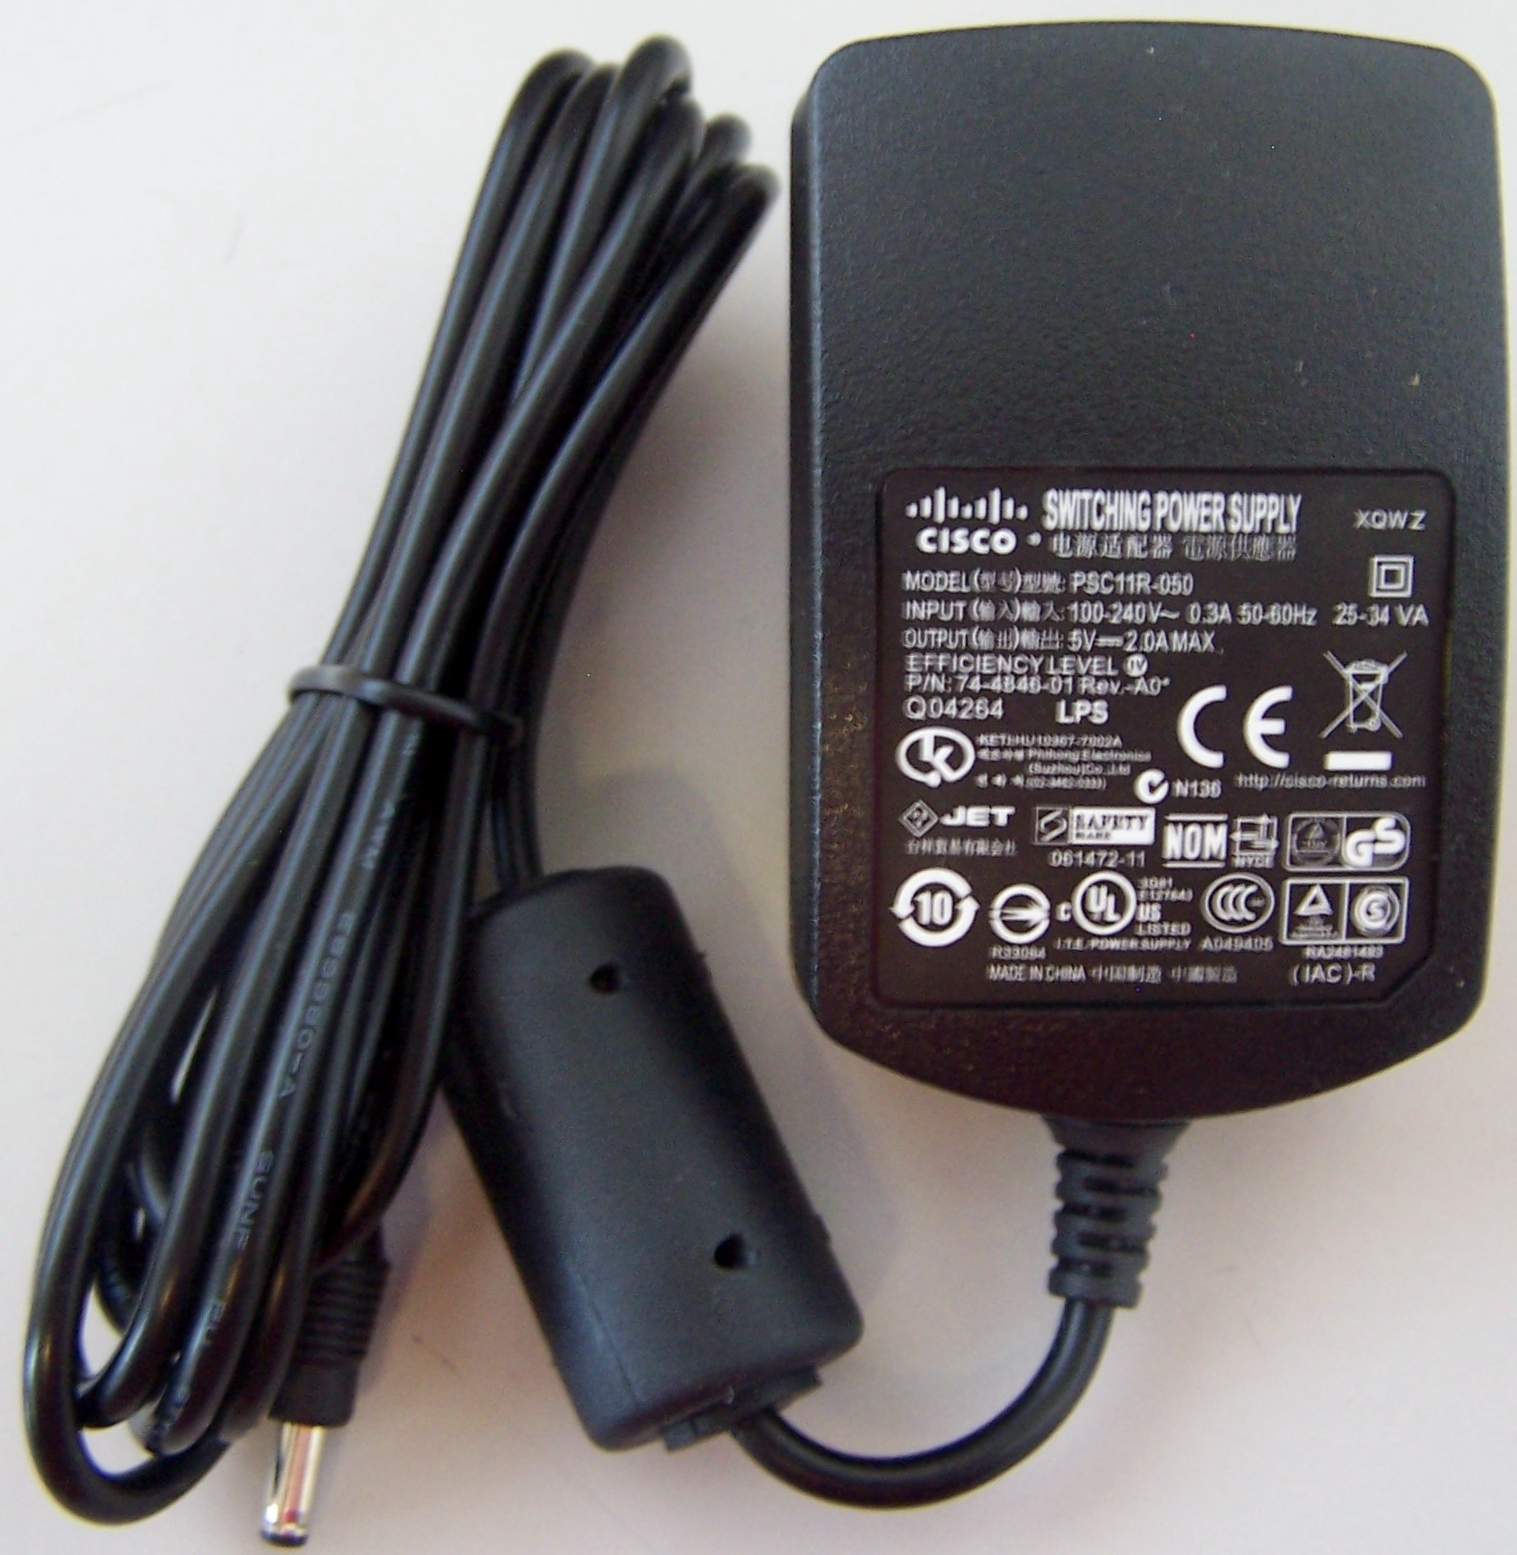 PHIHONG PSC11R-050 5V 300mA AC Wall Adapter for sale online 